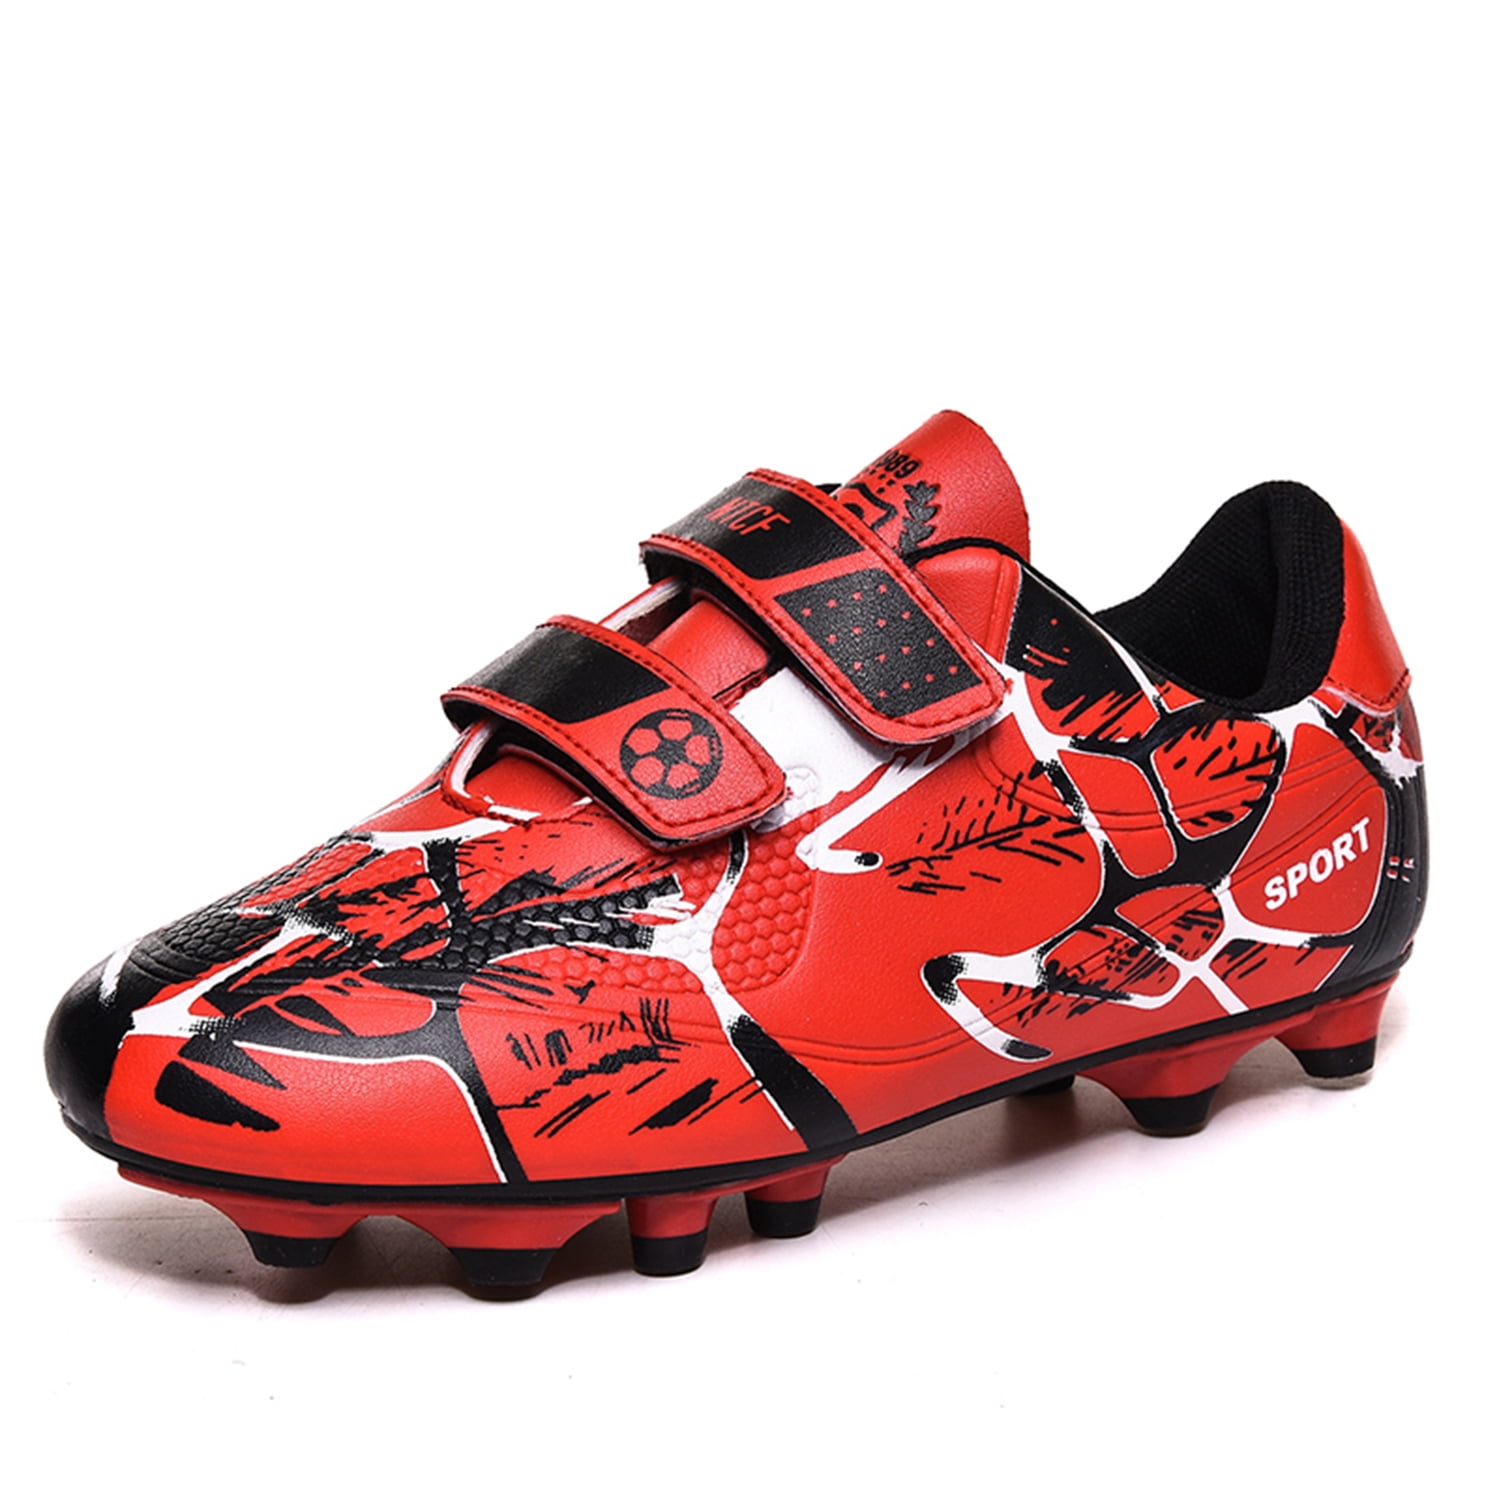 Men Kids Soccer Cleats Shoes Indoor Sport Football Shoes Trainer Nail Fashion 